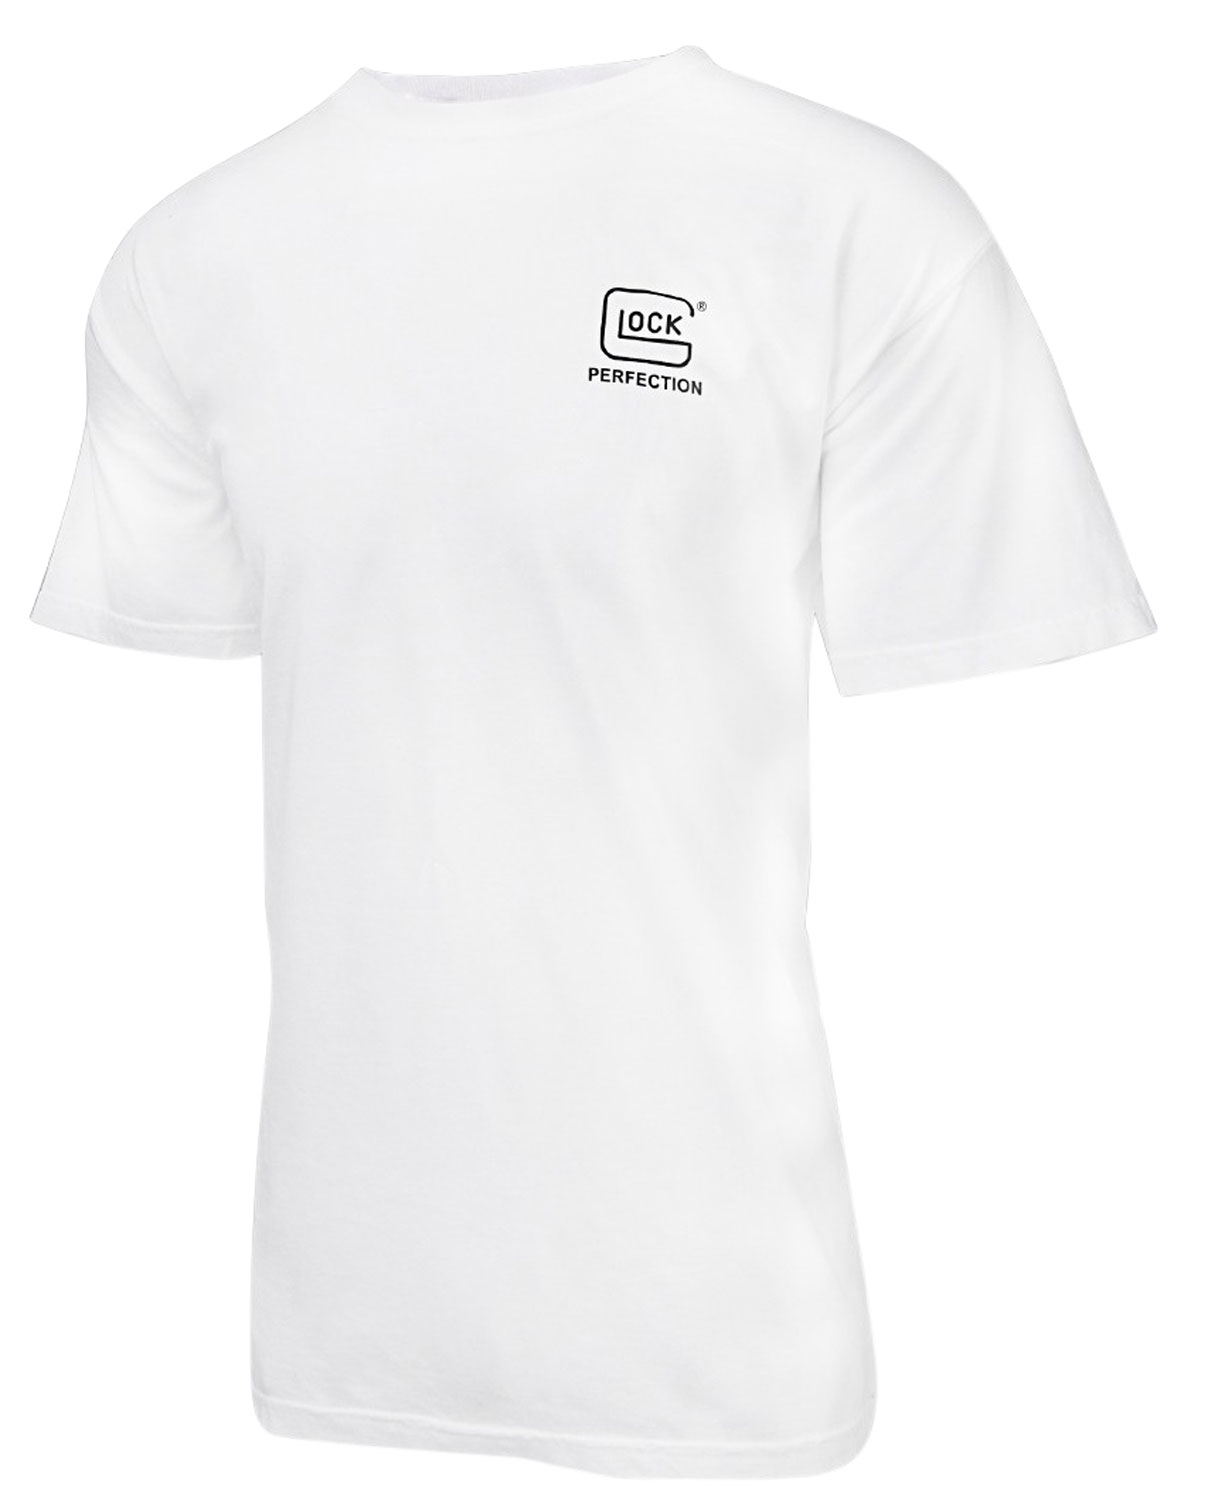 Glock AA75109 Carry With Confidence T-Shirt White XL Short Sleeve